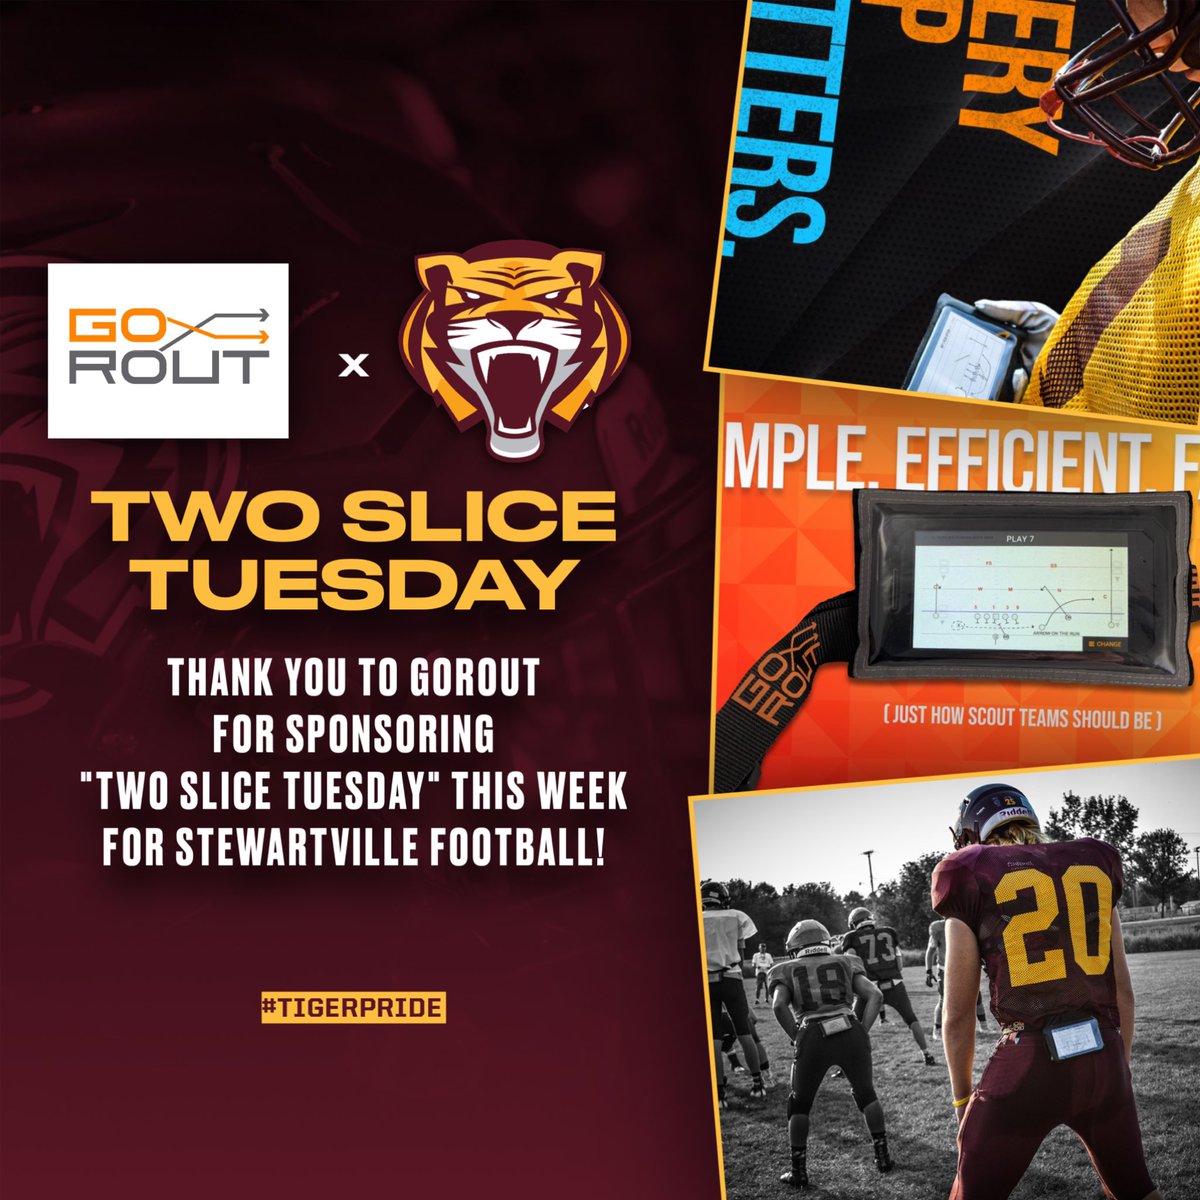 Huge thank you to @Go_Rout for sponsoring ✌️🍕Tuesday this week!

We’ve been using GoRout for our scout team needs the past 7 seasons & we wouldn’t do it any other way! Improves the efficiency & effectiveness of our scout team reps to better prepare us to win on Friday night!💨💪